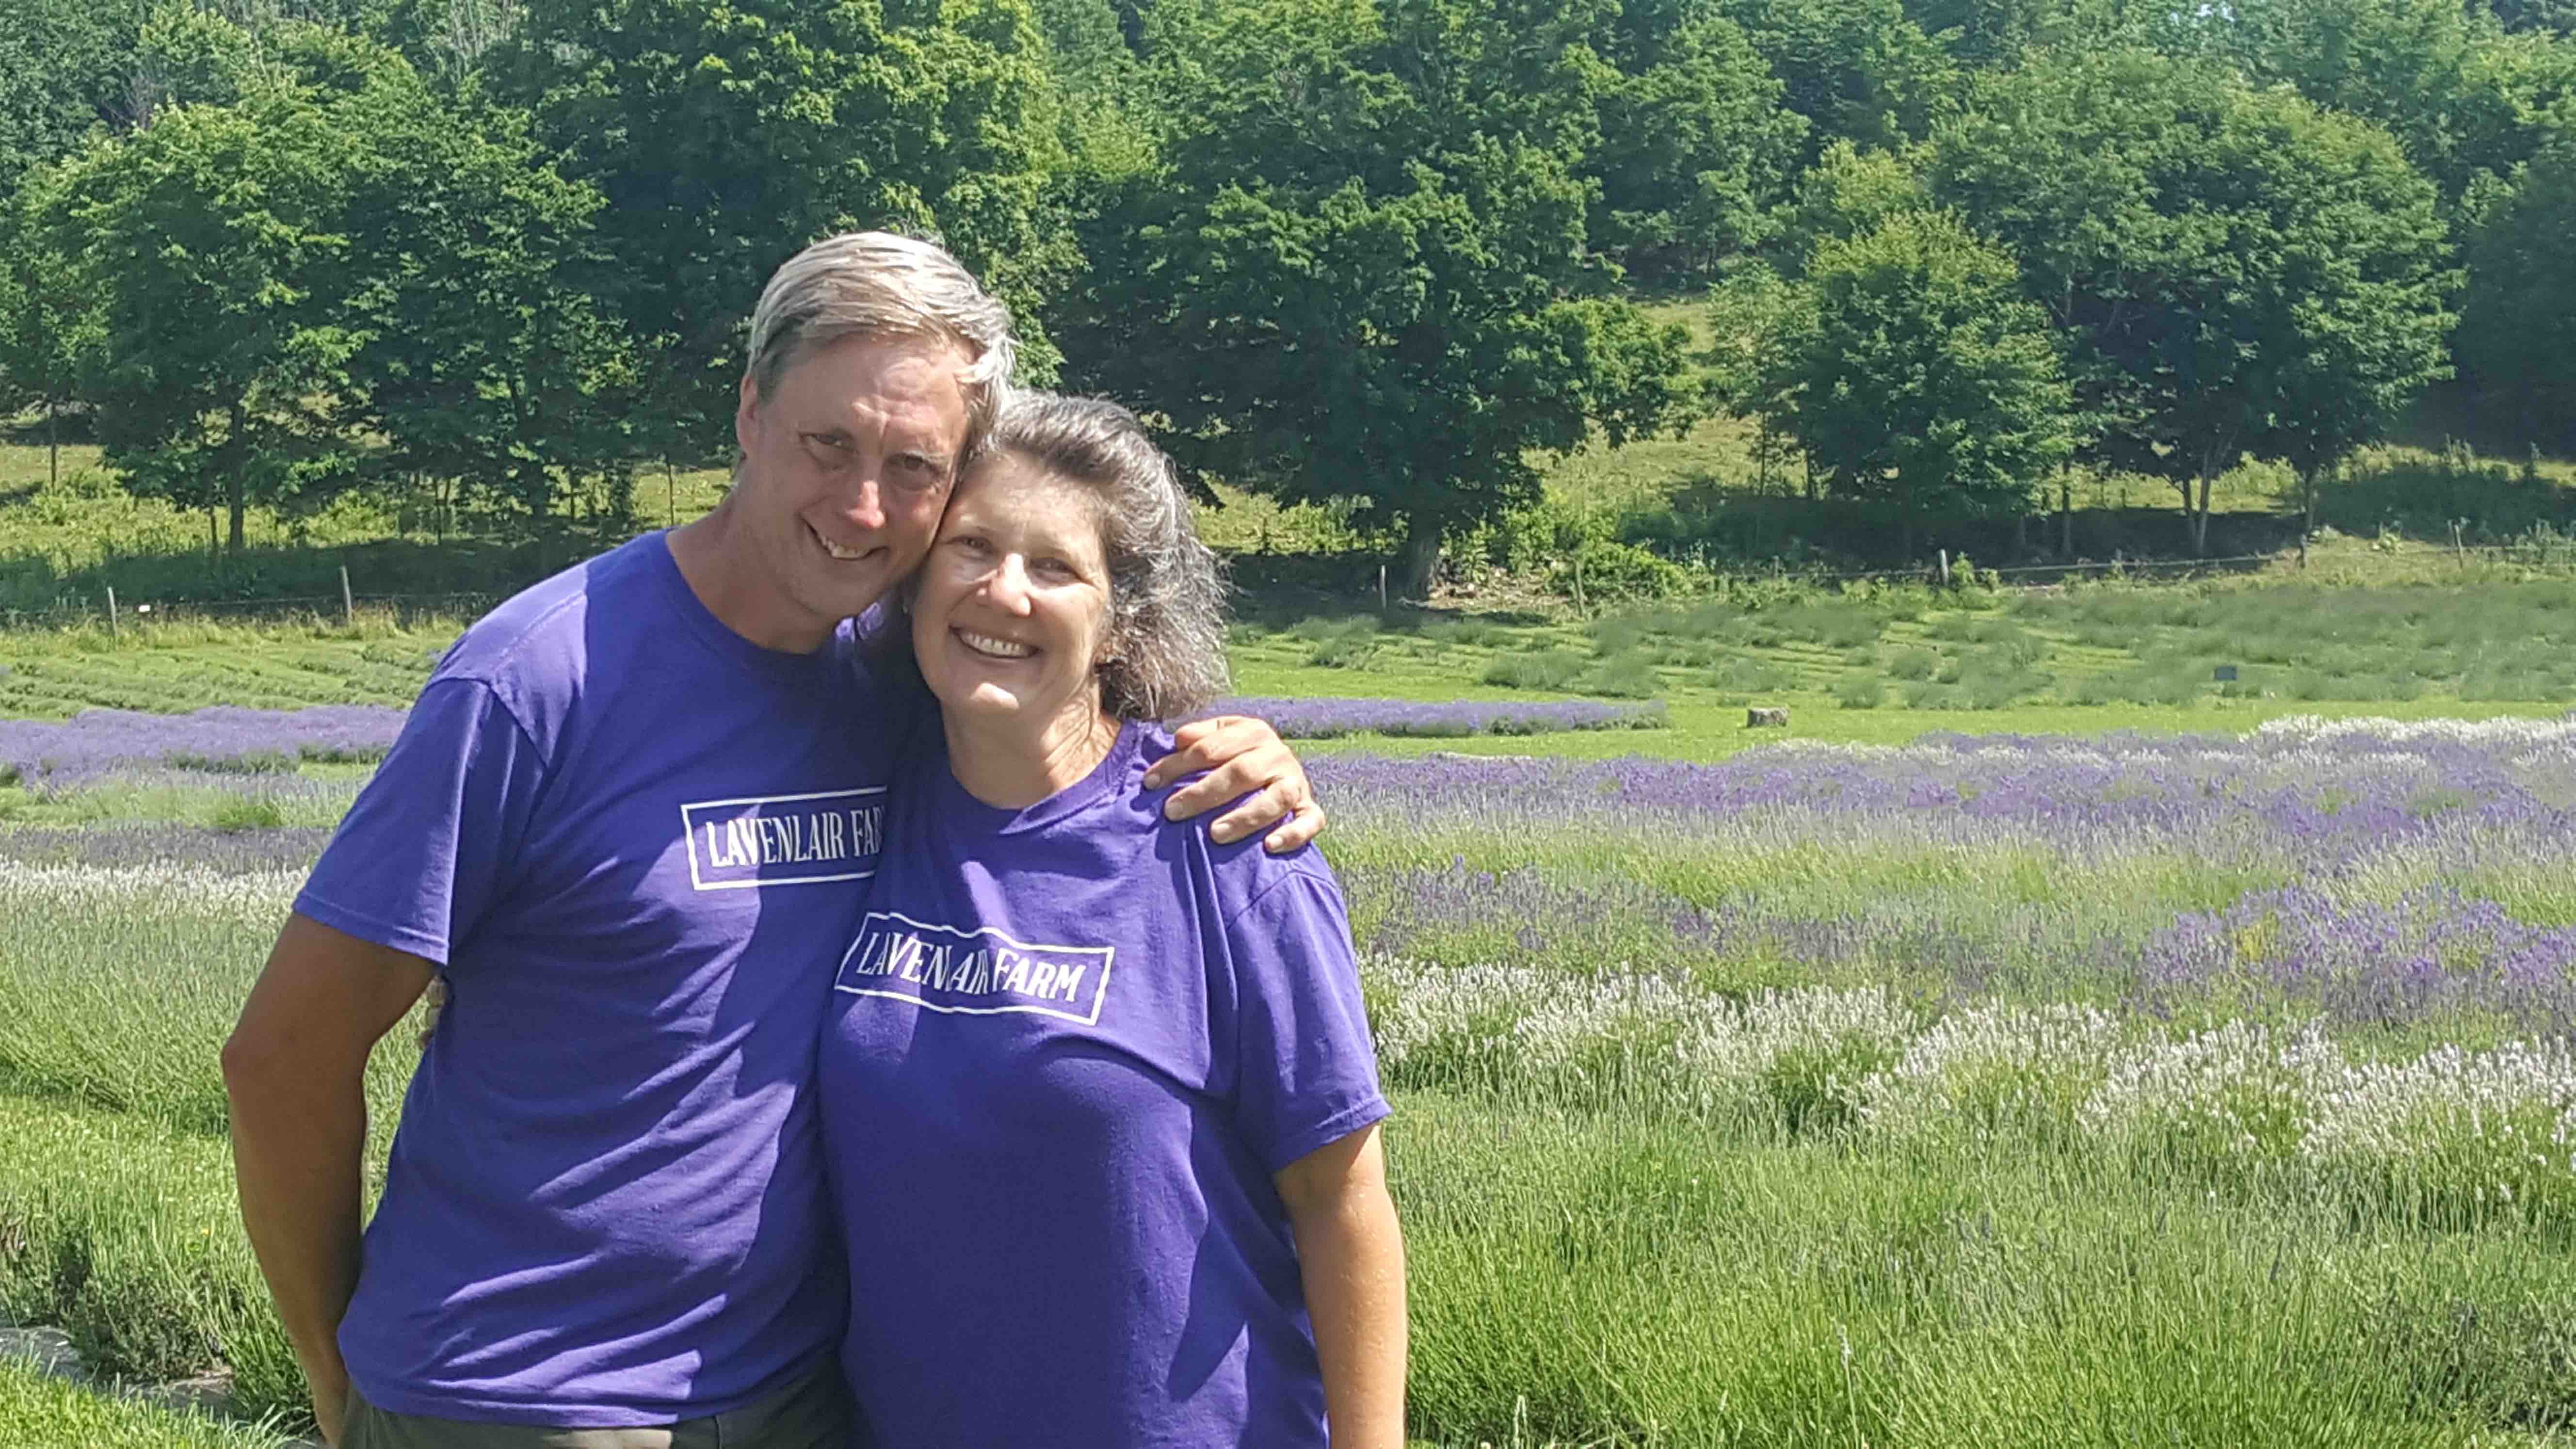 Owners David and Diane Allen at Lavenlair Farm